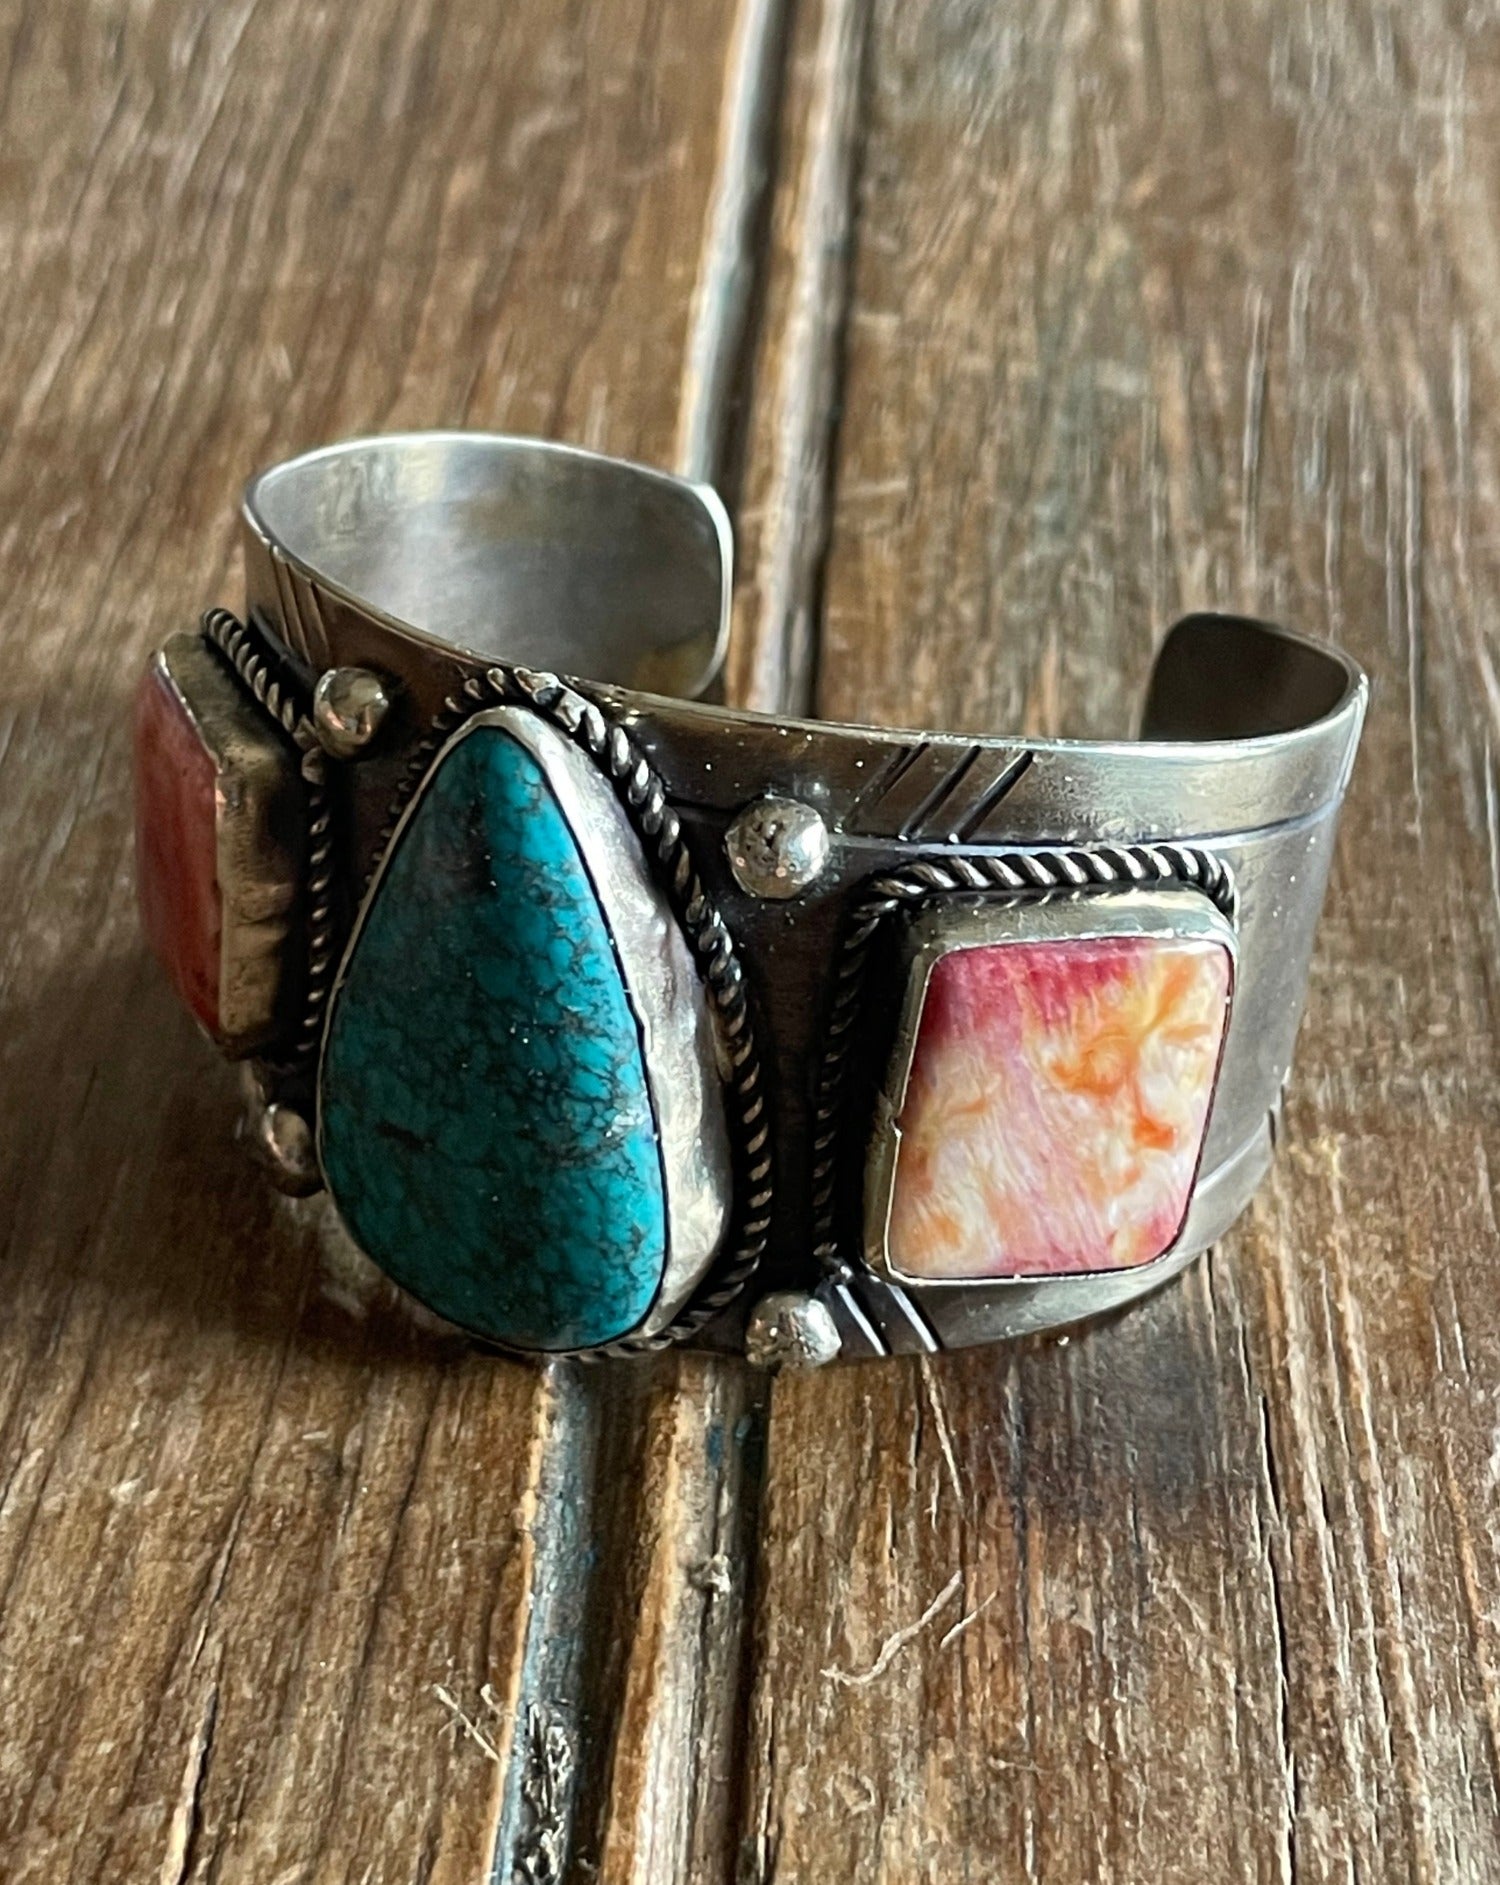 German silver cuff bracelet with turquoise and spiny stones